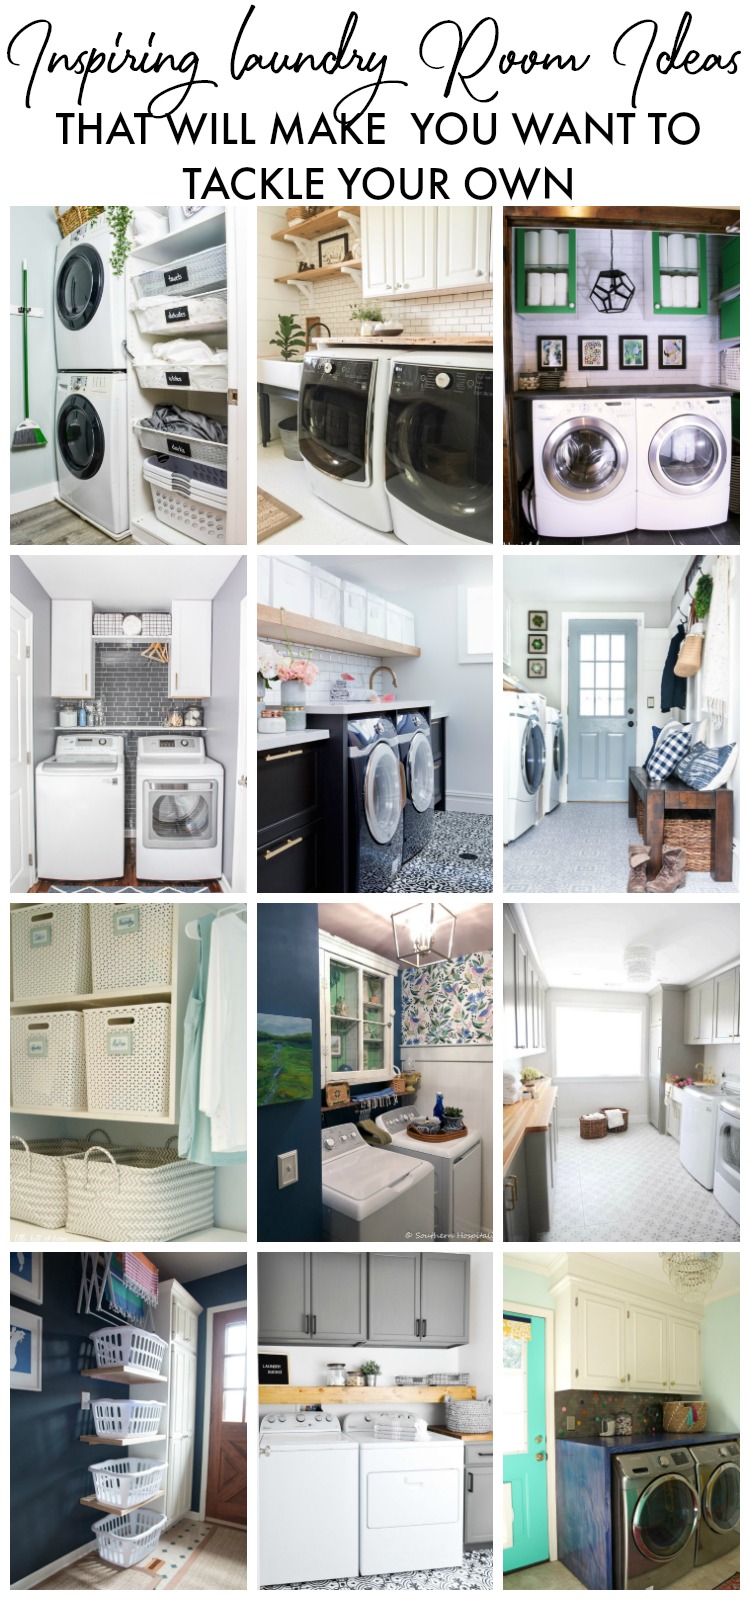 Inspiring Laundry Room Ideas that will Make you want to Tackle Yours - This is our Bliss